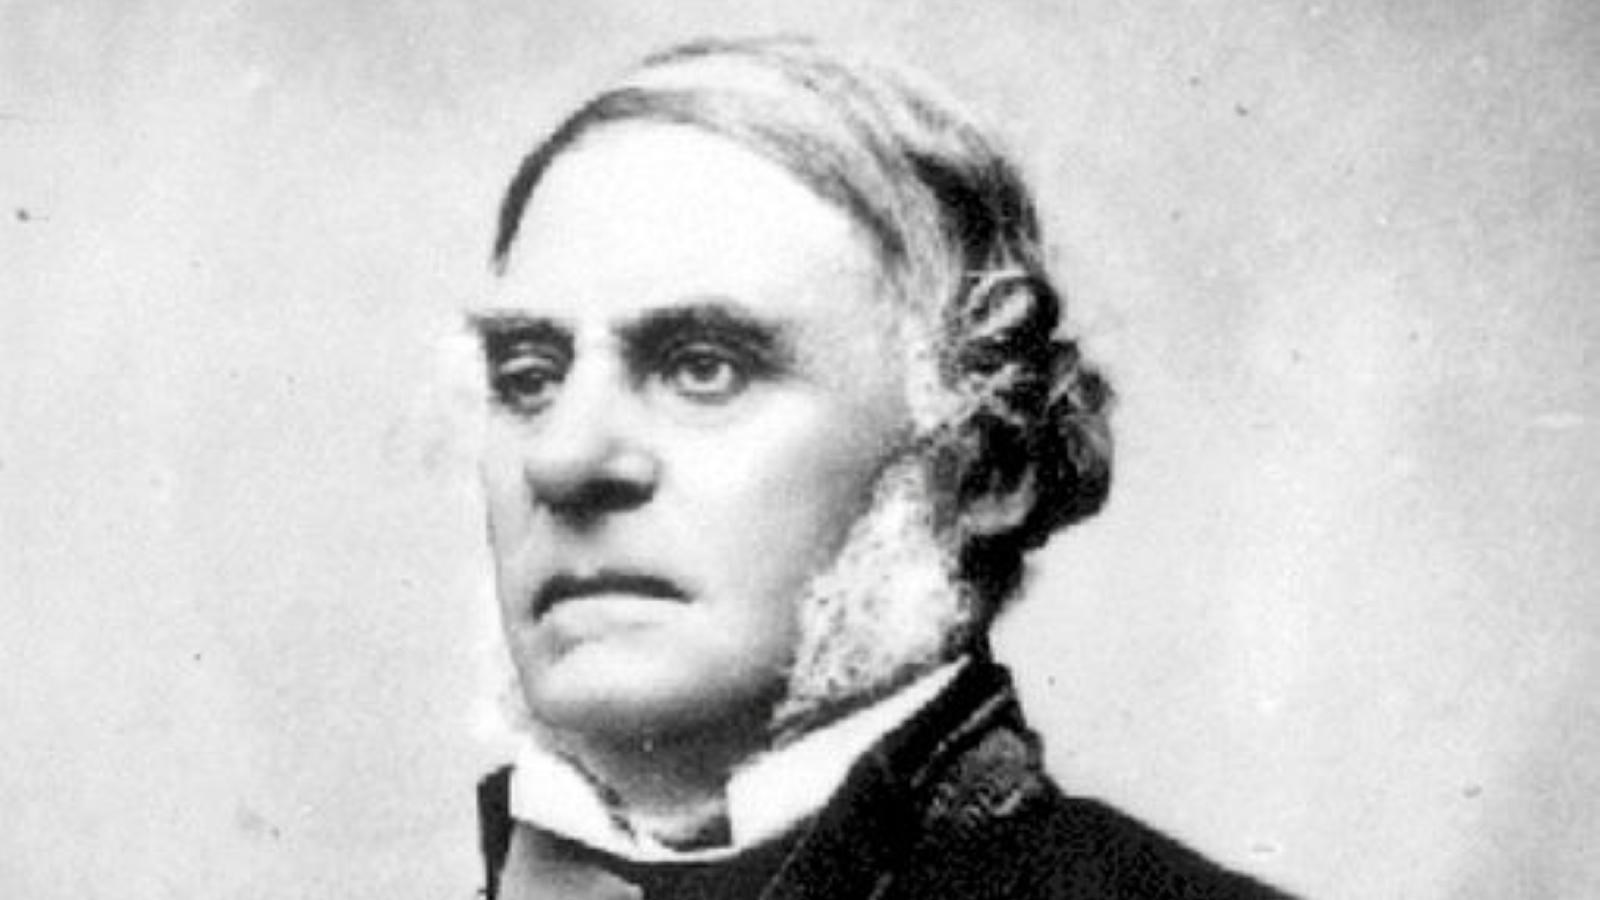 Black and white photograph of an imposing man in formal dress